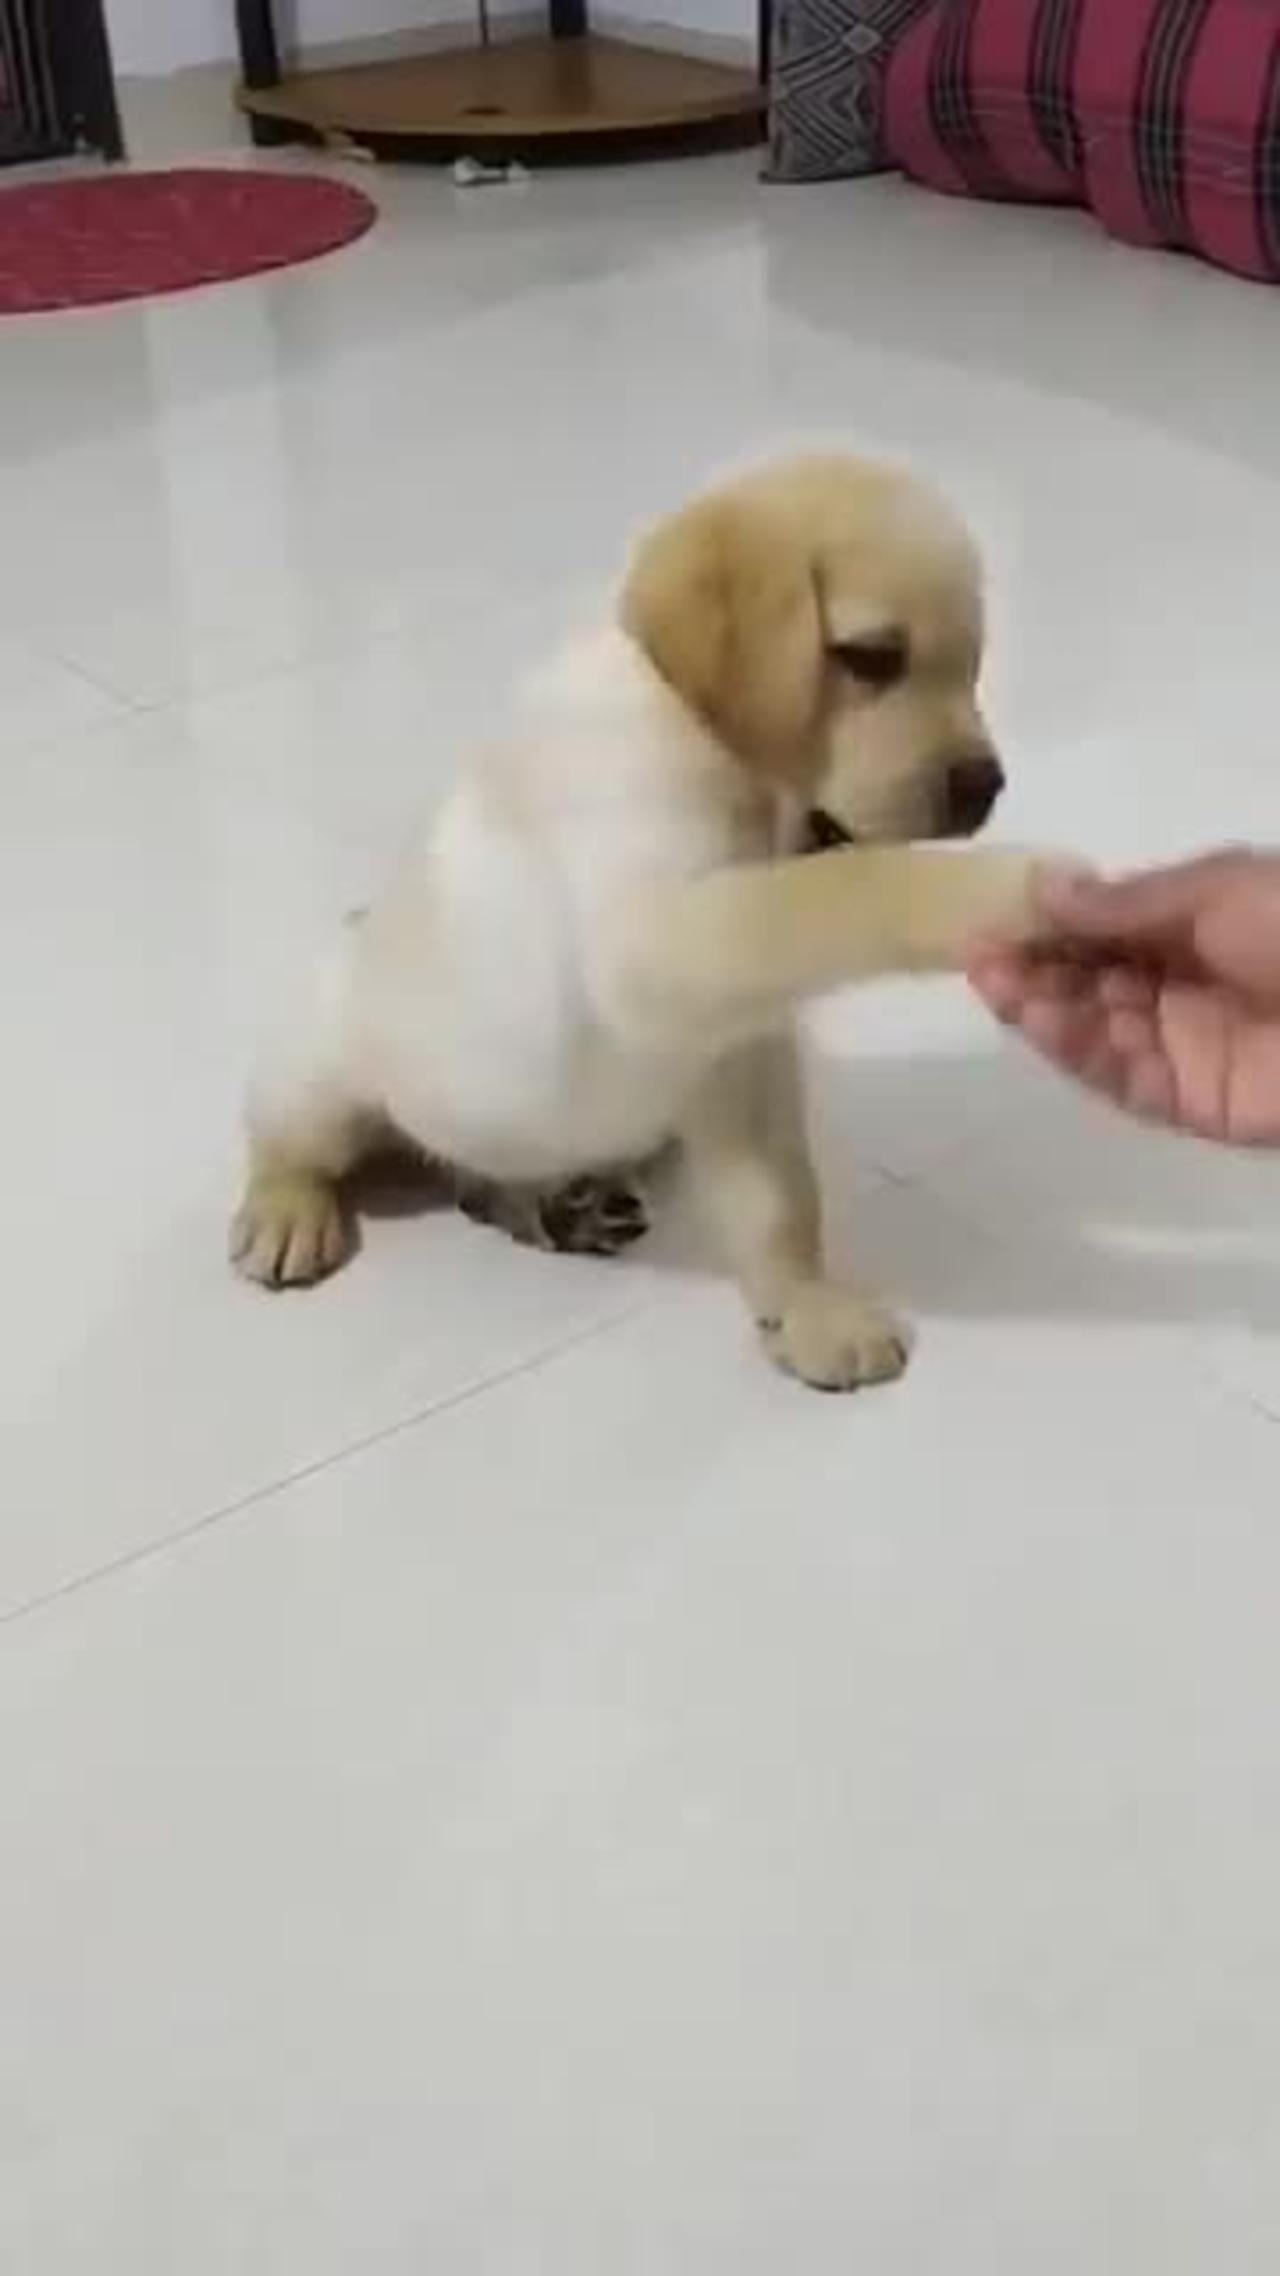 Best training dog video to teach how to shake hands with a dog